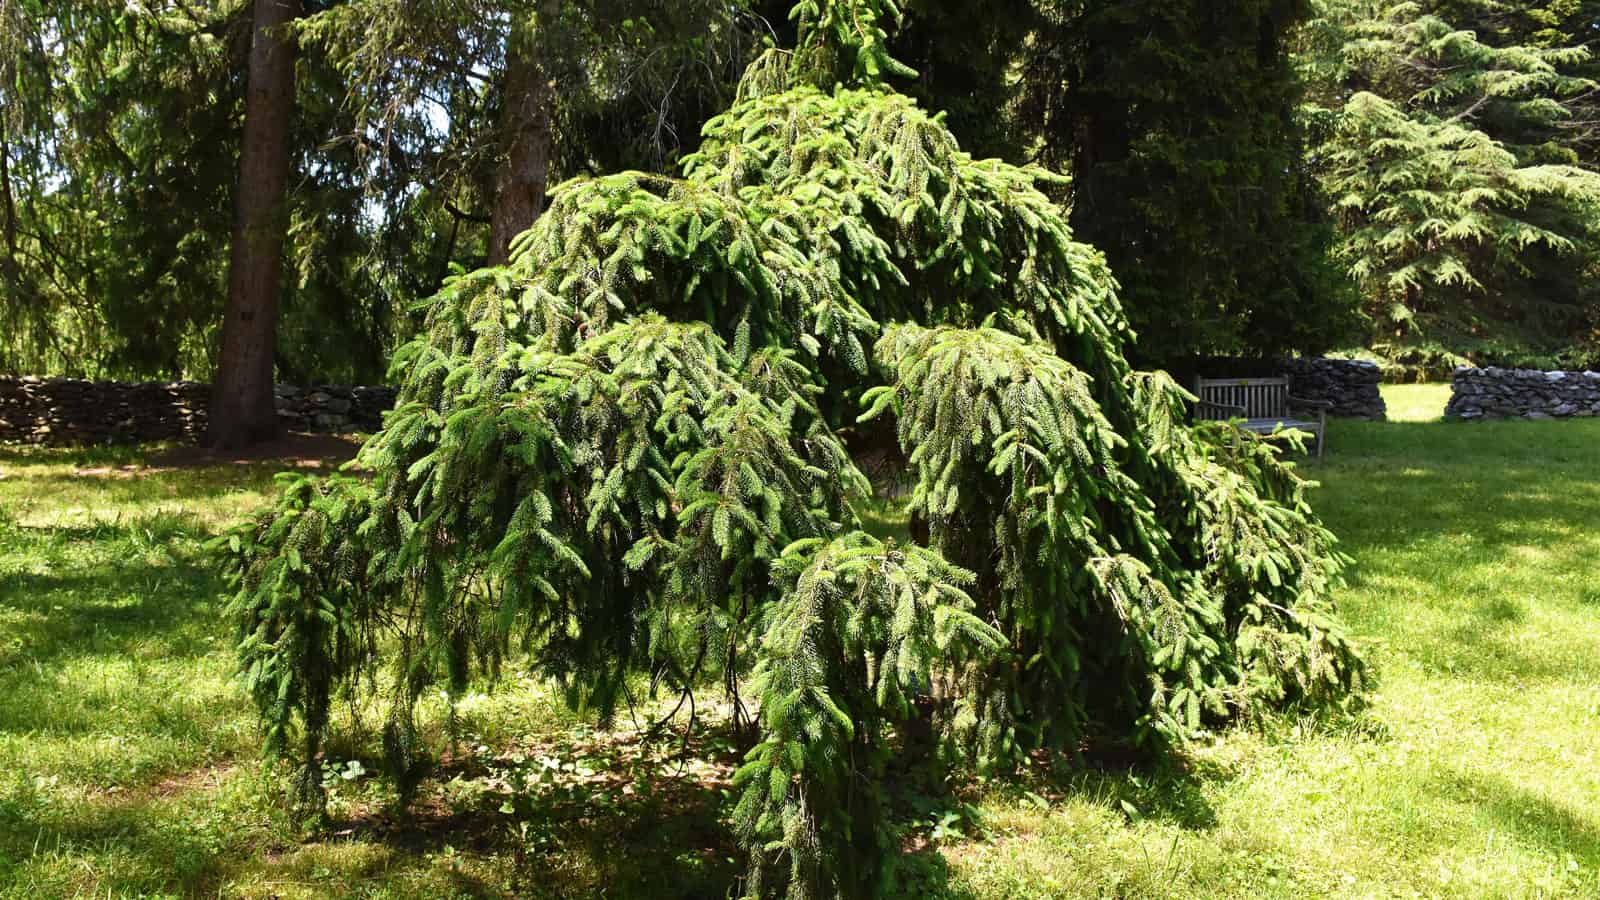 A small Weeping Norway Spruce tree 